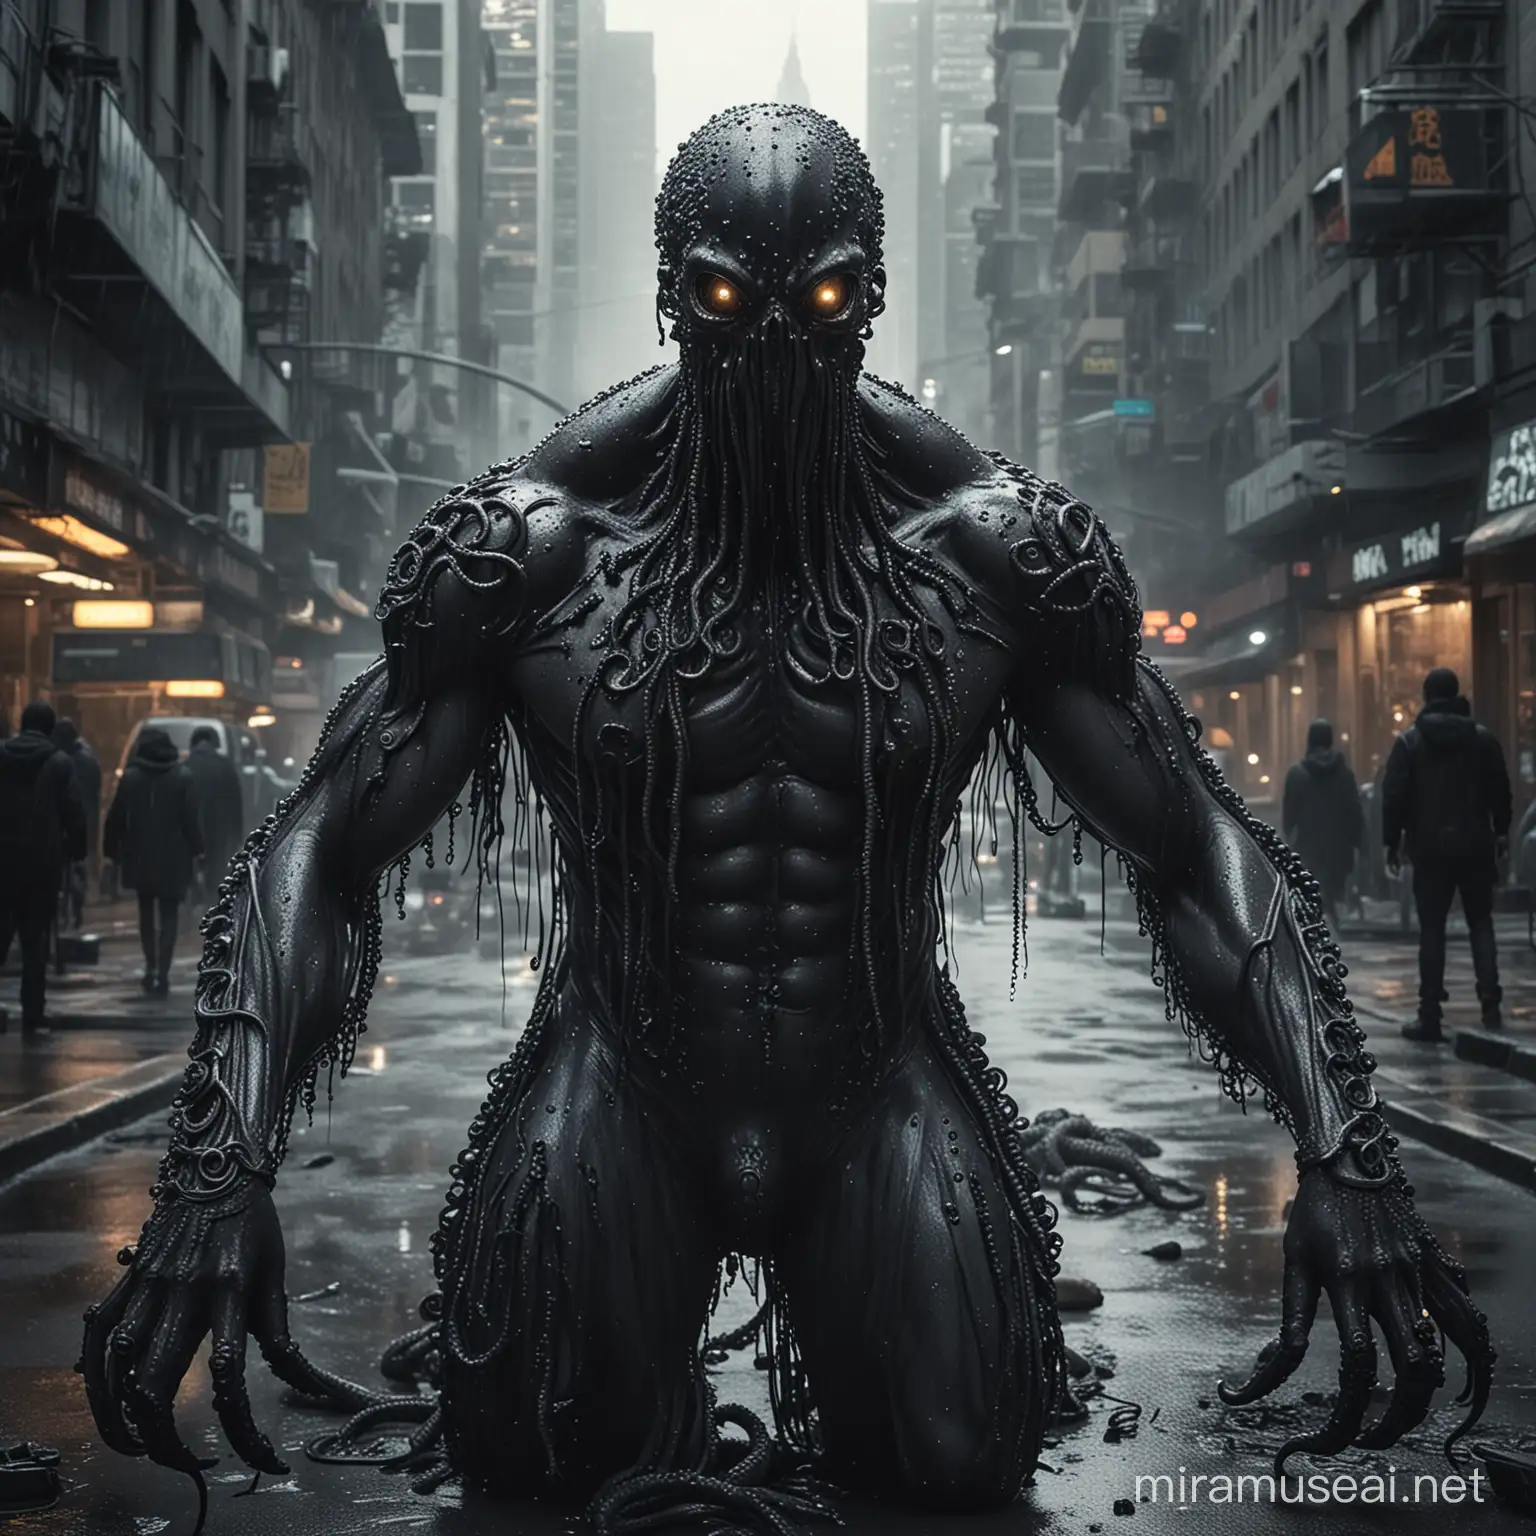 Full shot of Enormous black pearl man melting on a busy city street with futuristic elements, transformed into a terrifying creature with octopus tentacle elements on the body, intricate details, surreal, fantasy, dynamic composition, cinematic urban environment, pearl texture, ethereal atmosphere, character design by giger, 4k resolution, street photography style, sigma 85mm f/8 lens, with dramatic lighting effects, darker and more mysterious, with a rusted car wreck nearby